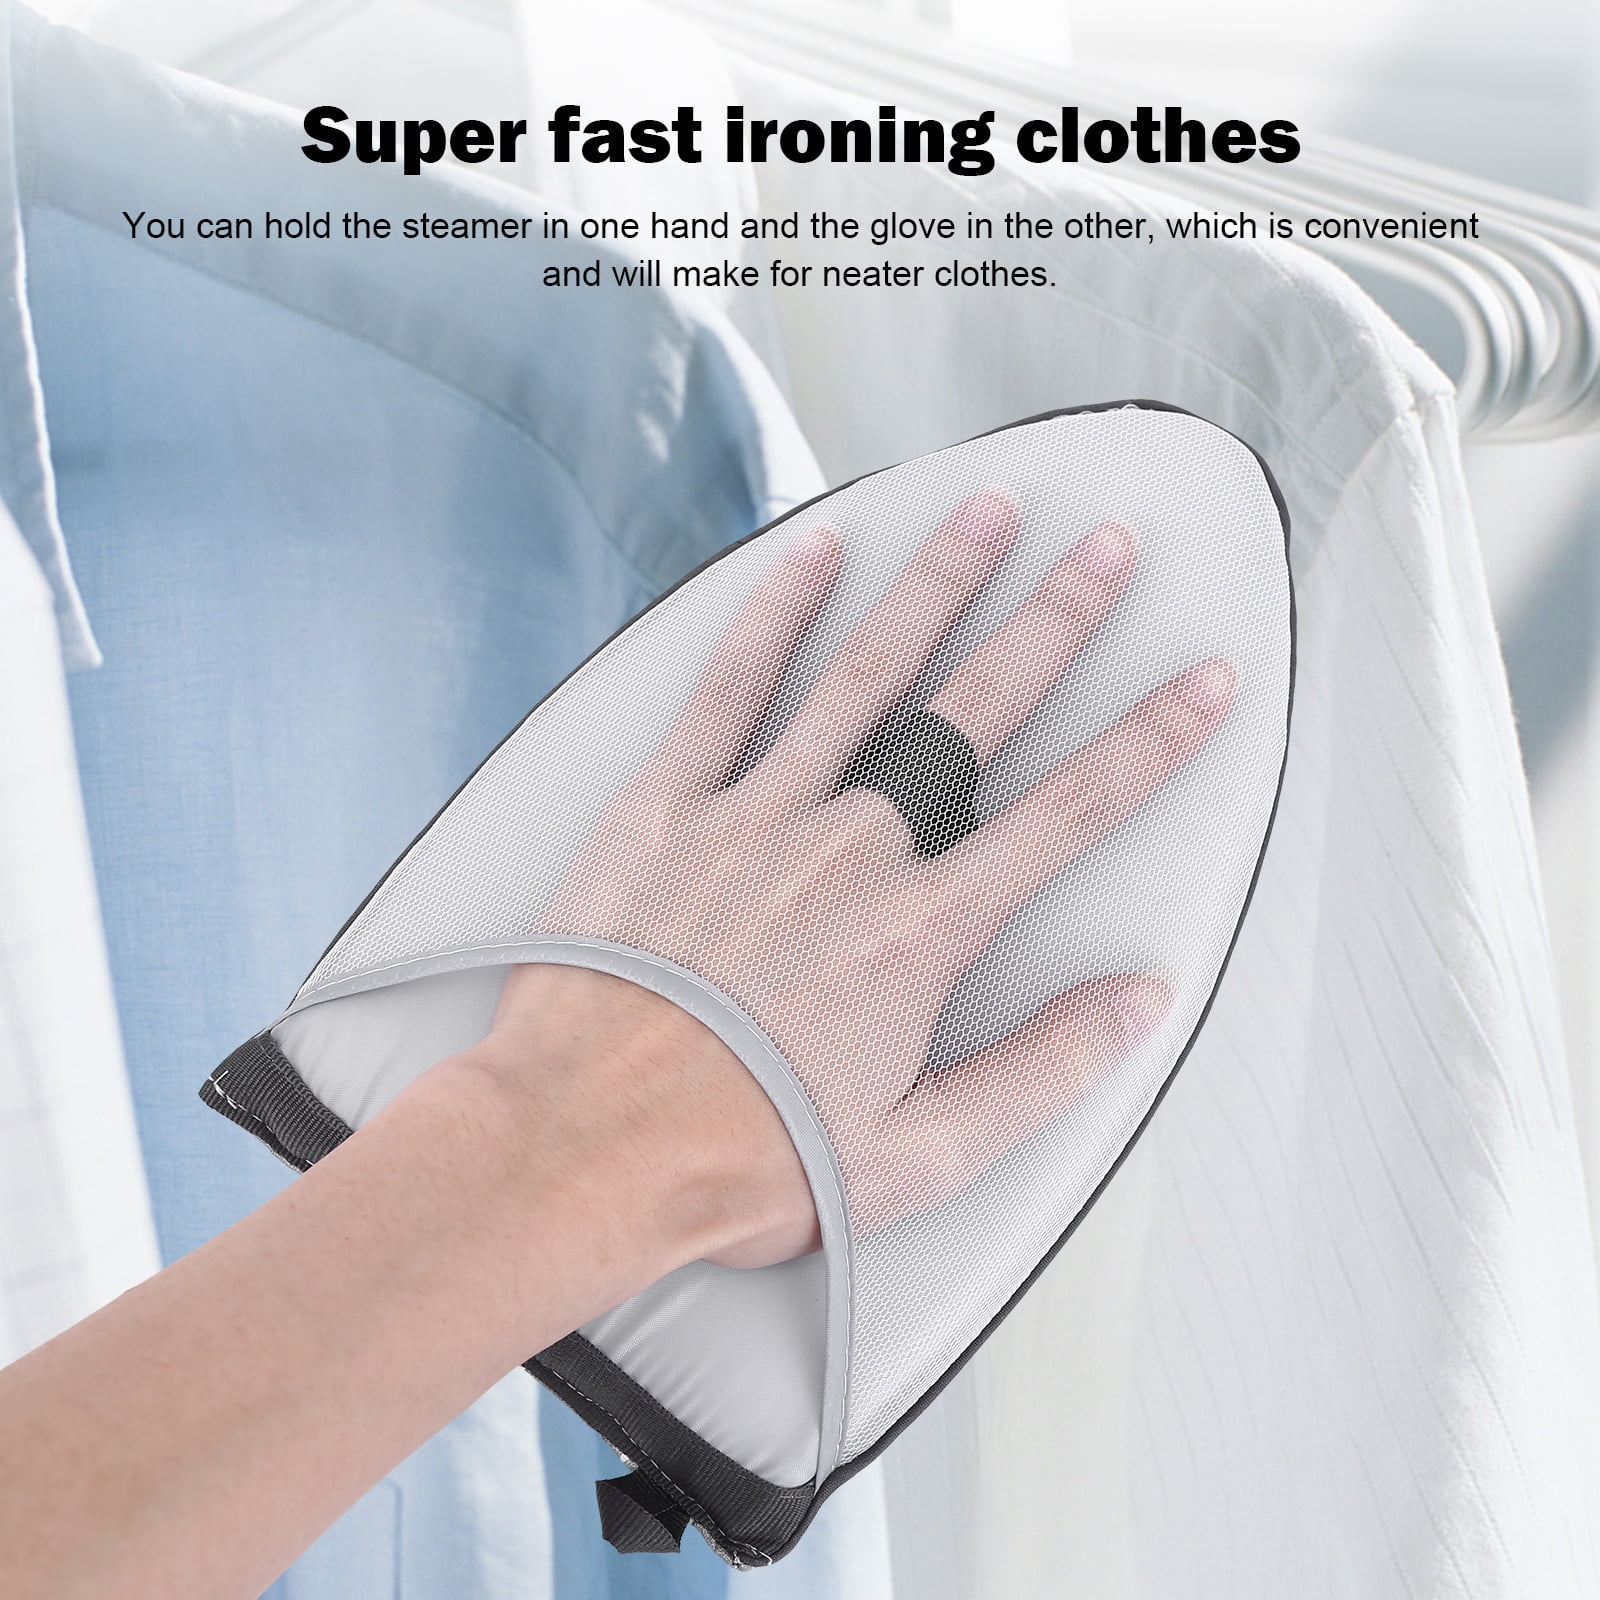 Bokon 4 Pieces Heat Resistant Garmrnt Gloves Garment Steamer Ironing Gloves Protective Garment Steaming Mitts Waterproof Protective Ironing Glove Anti Steam Durable Gloves for Clothes Steamer 